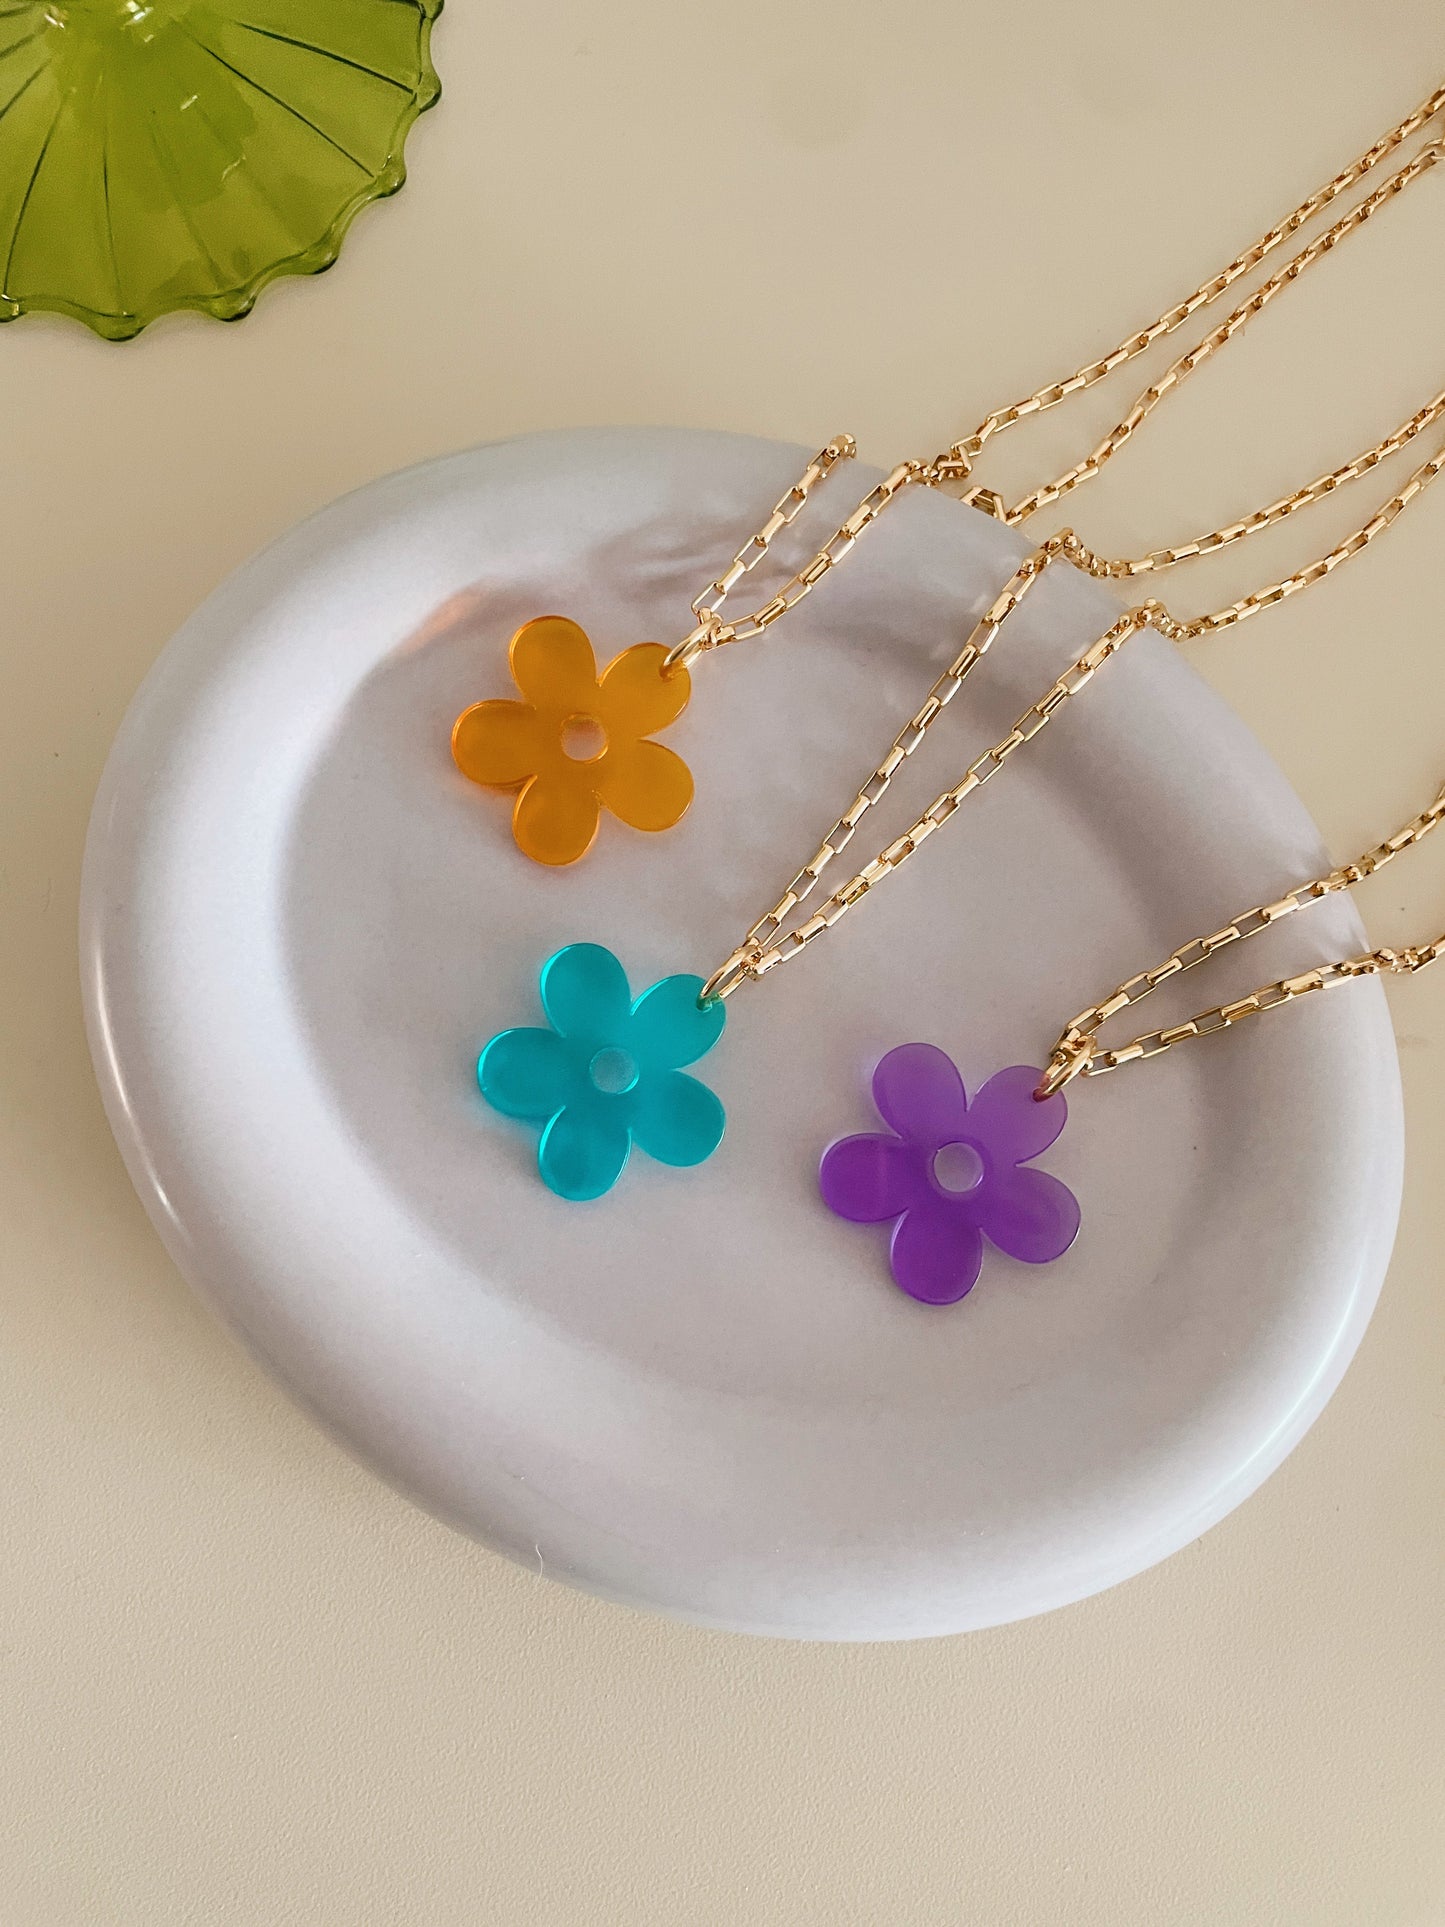 LIZZIE - 14k gold-plated chain necklace with flower charm